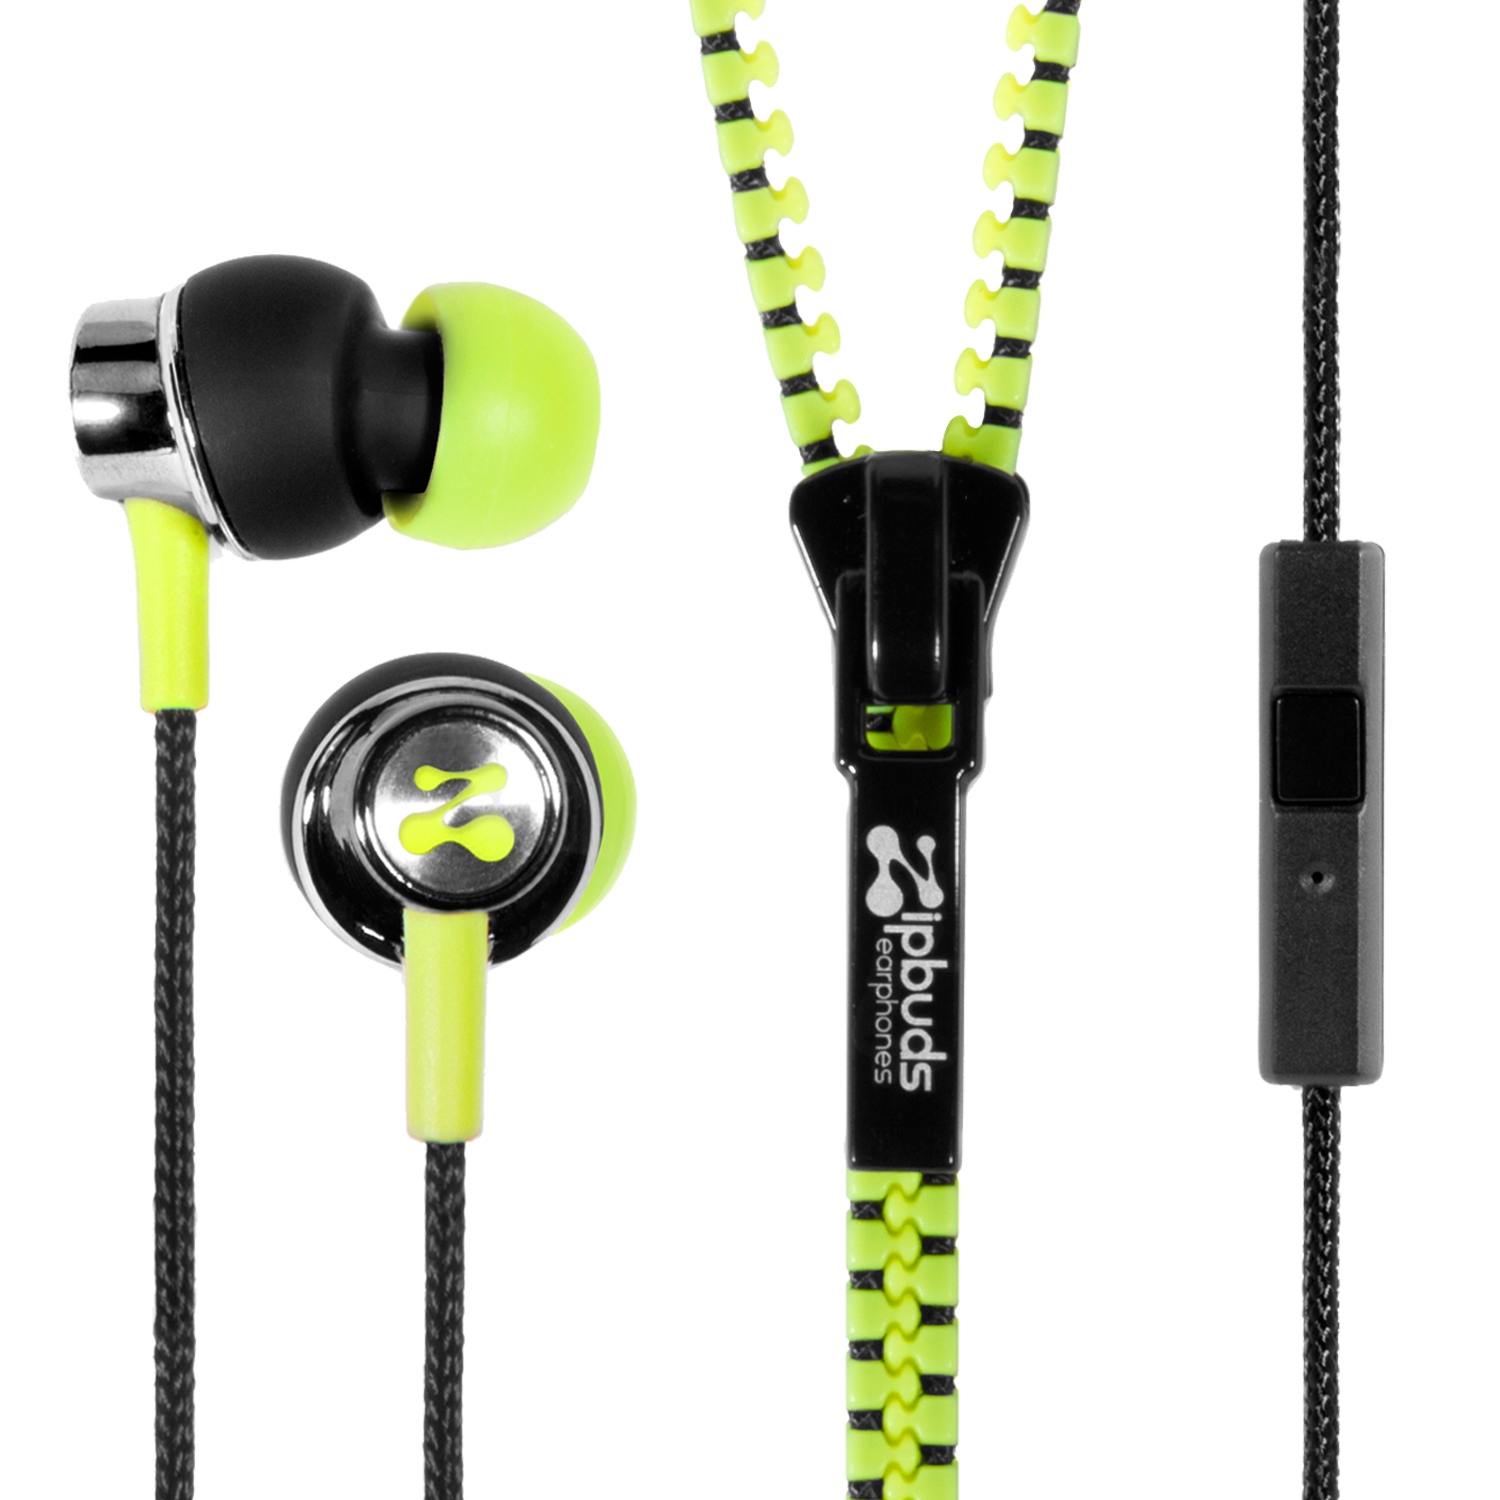 Zipbuds PRO Mic in Electric Yellow